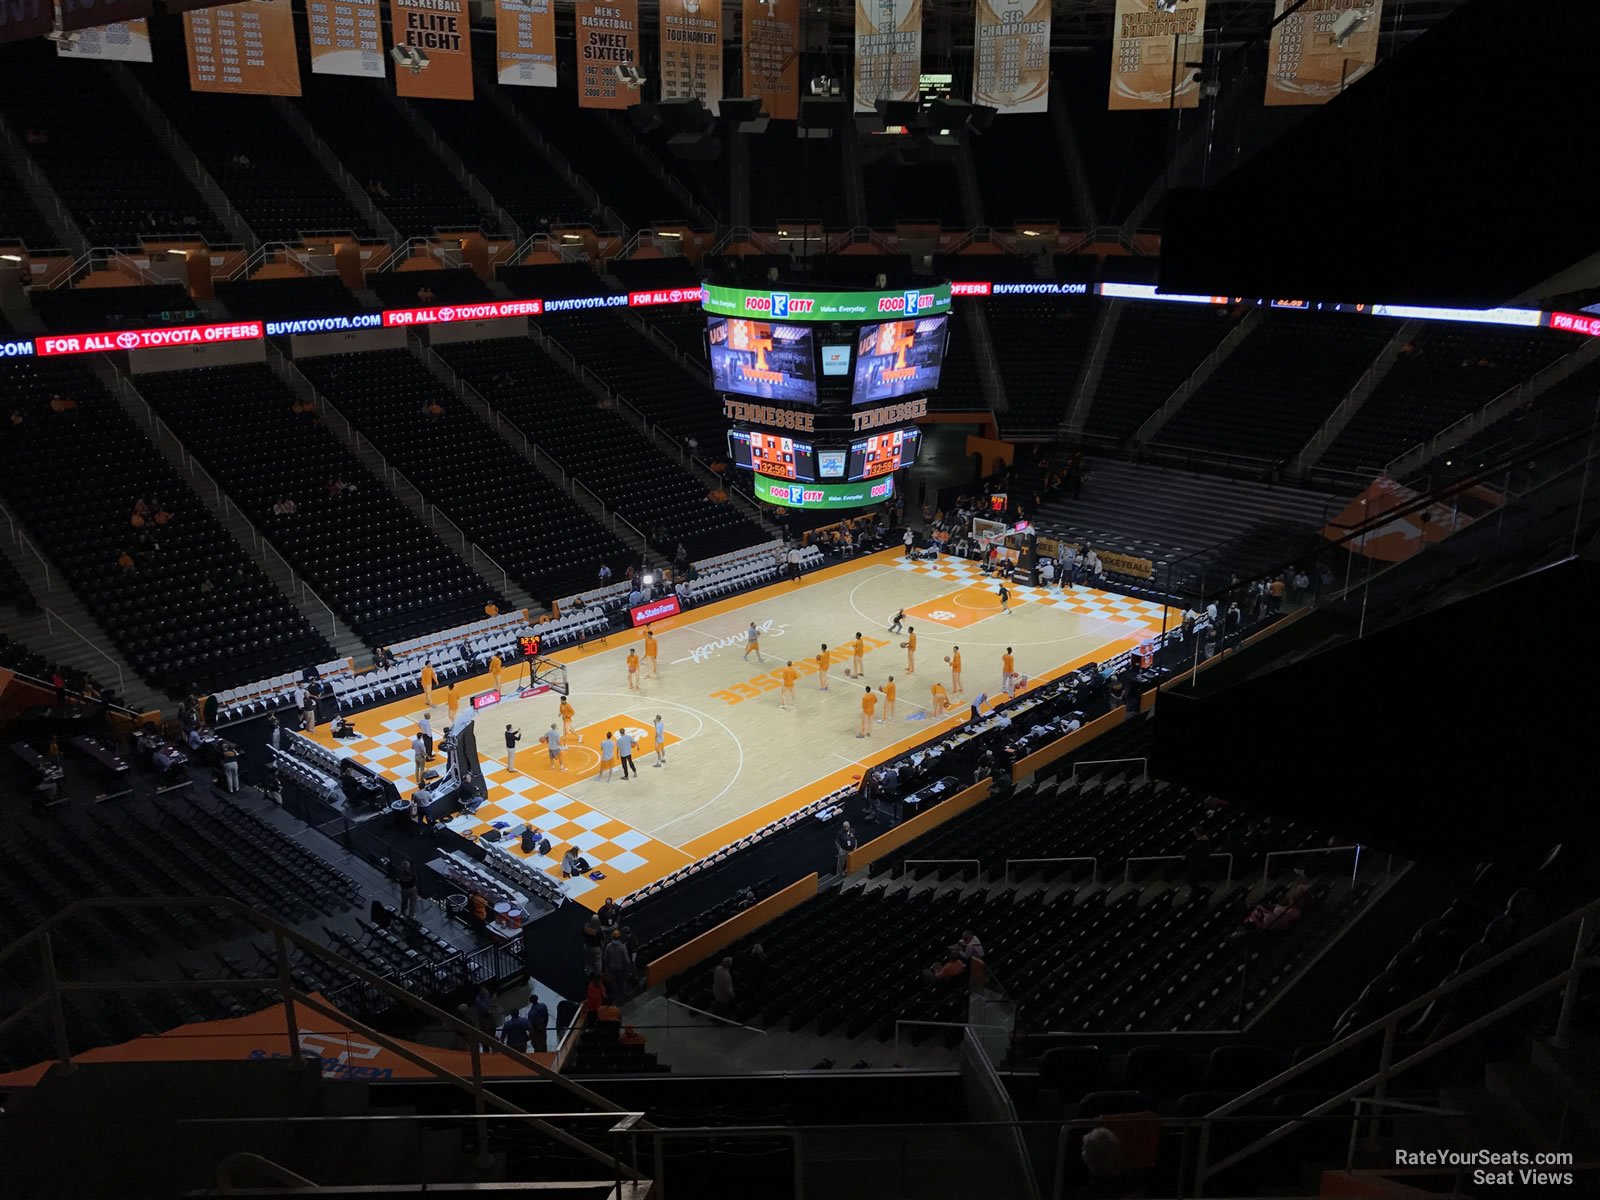 section 309, row 7 seat view  - thompson-boling arena